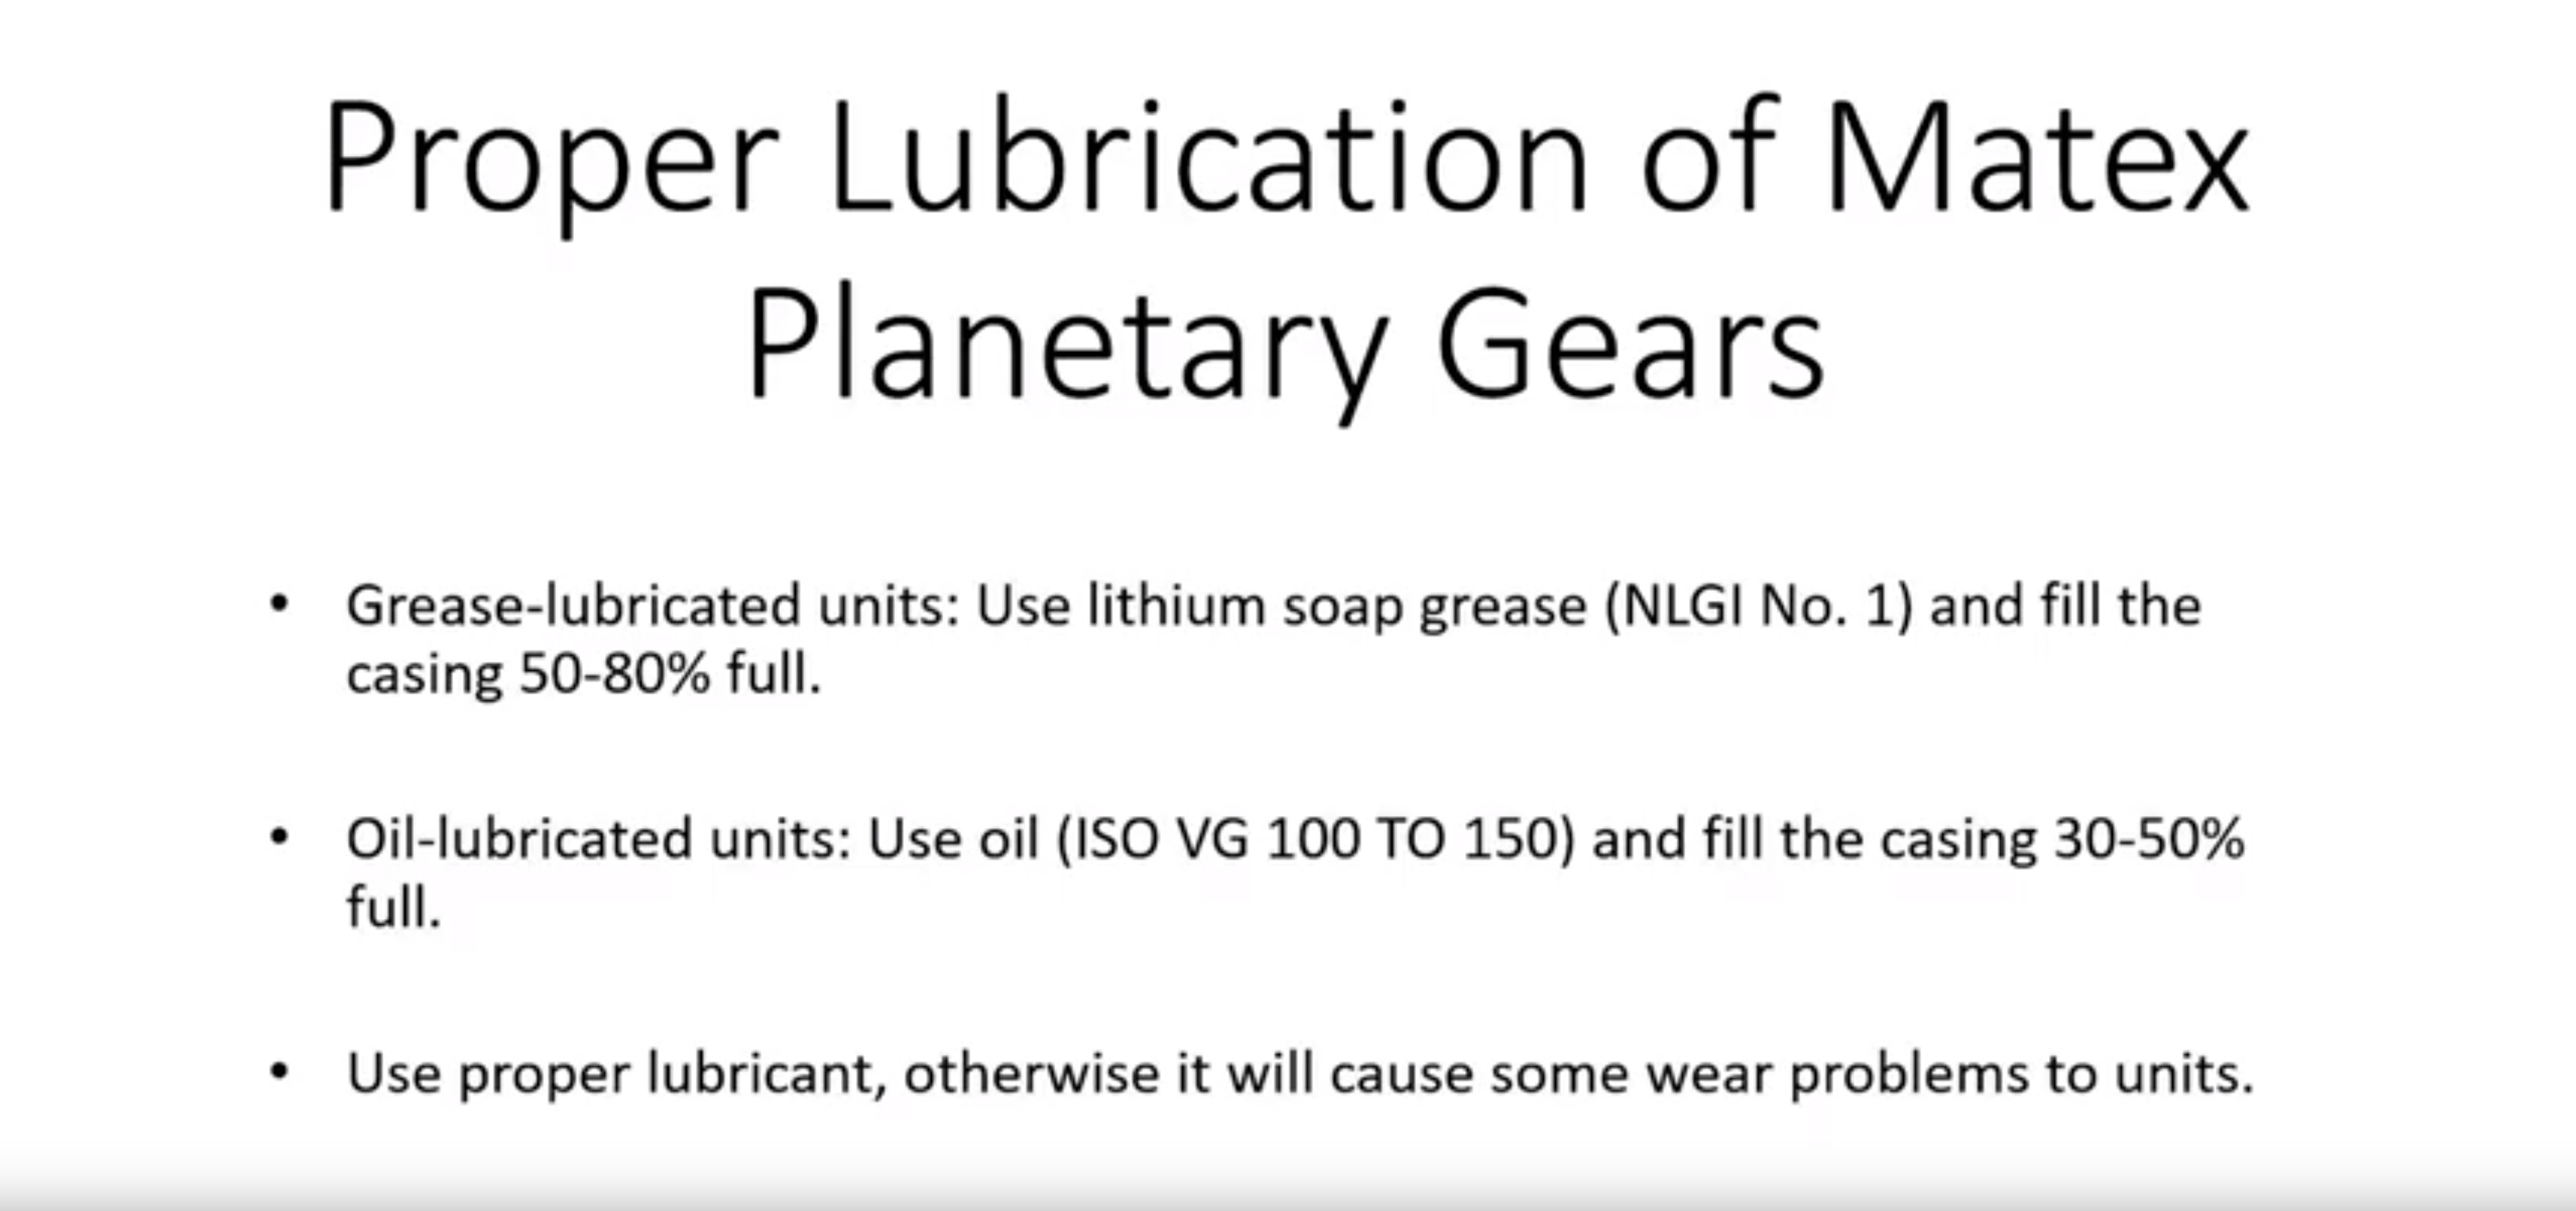 How to properly lubricate your planetary gears | Matex 